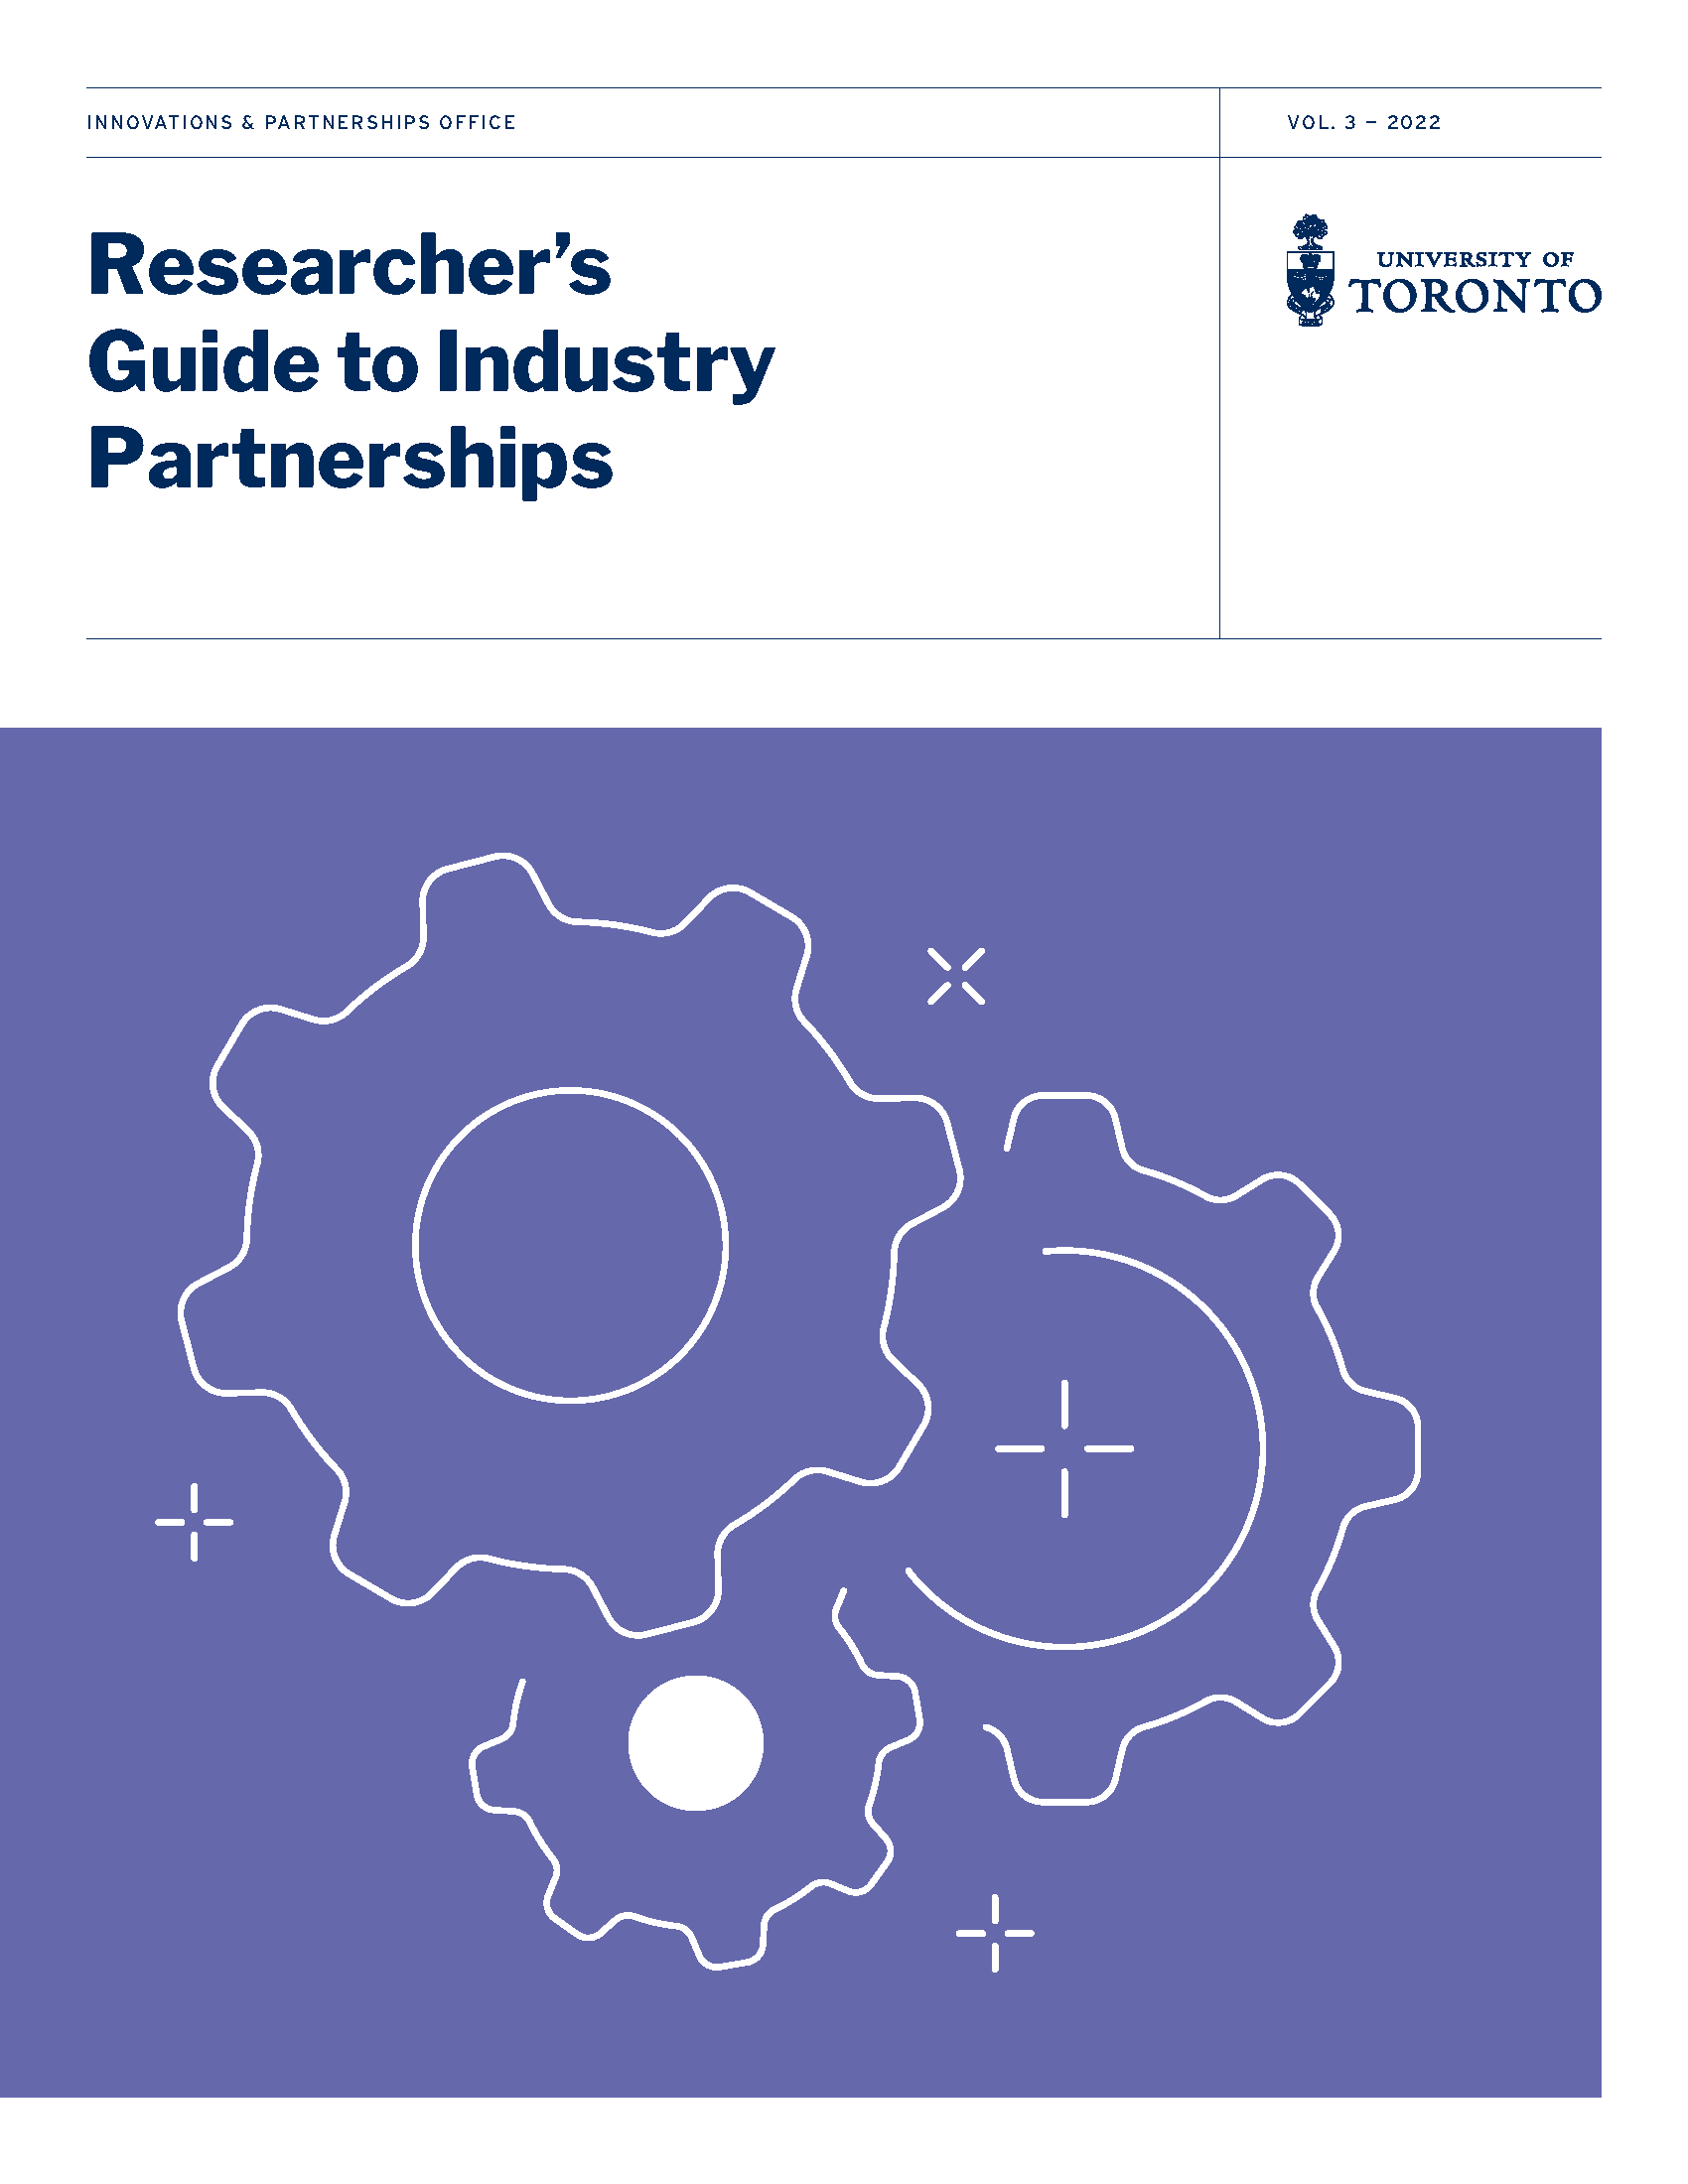 Cover page of researcher's guide to industry partnerships